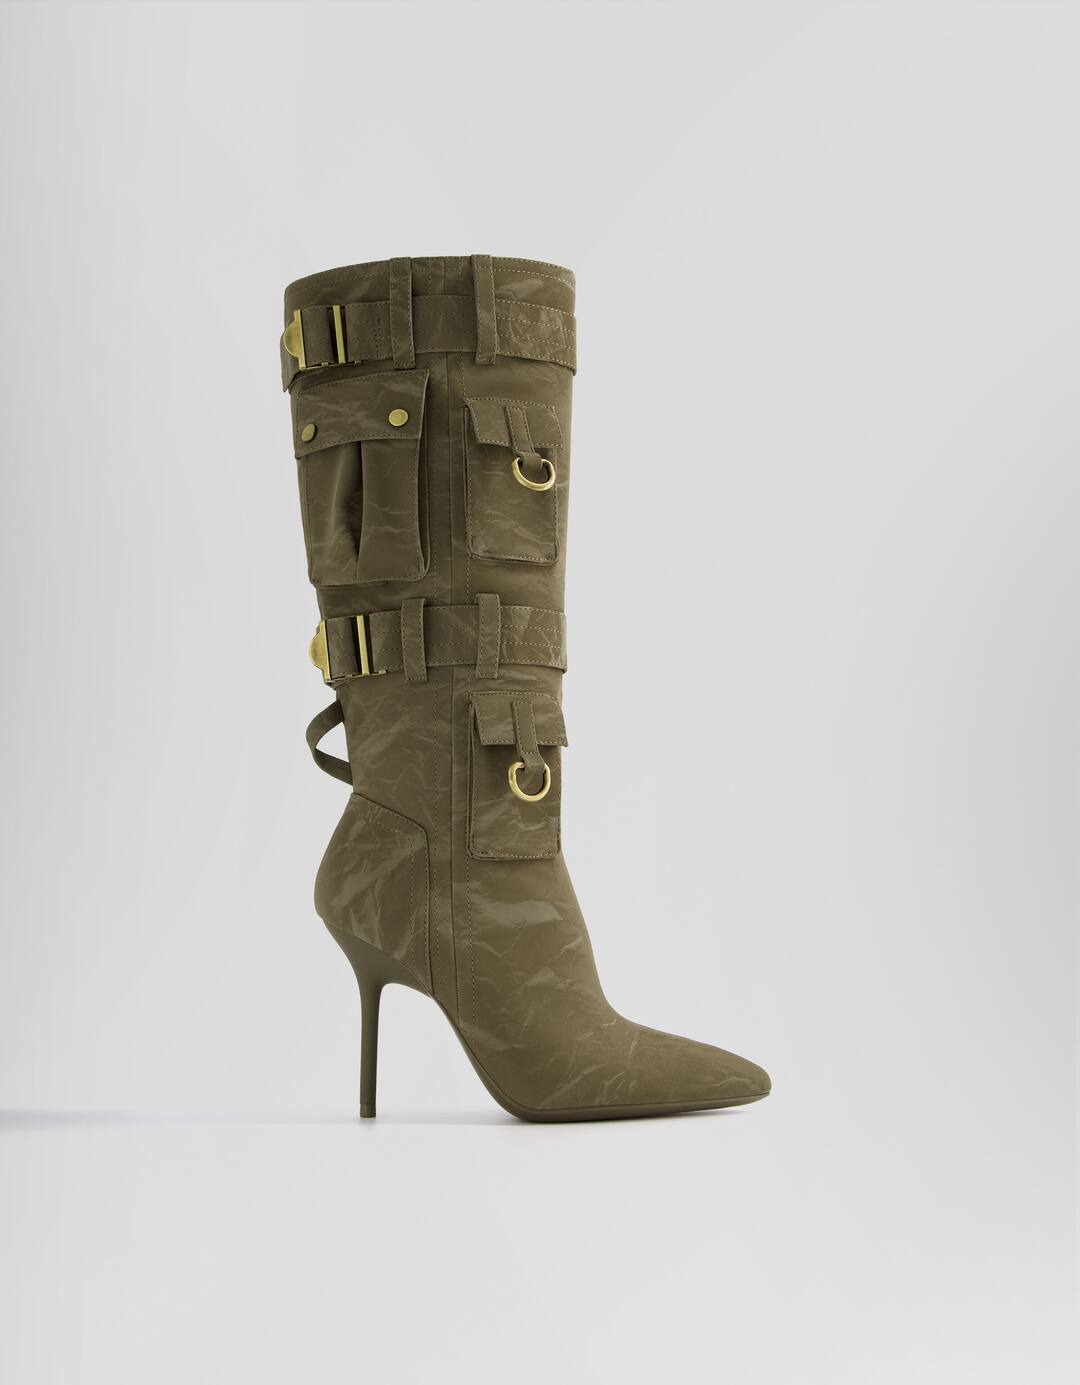 Multi-pocket high-heel boots with metal details